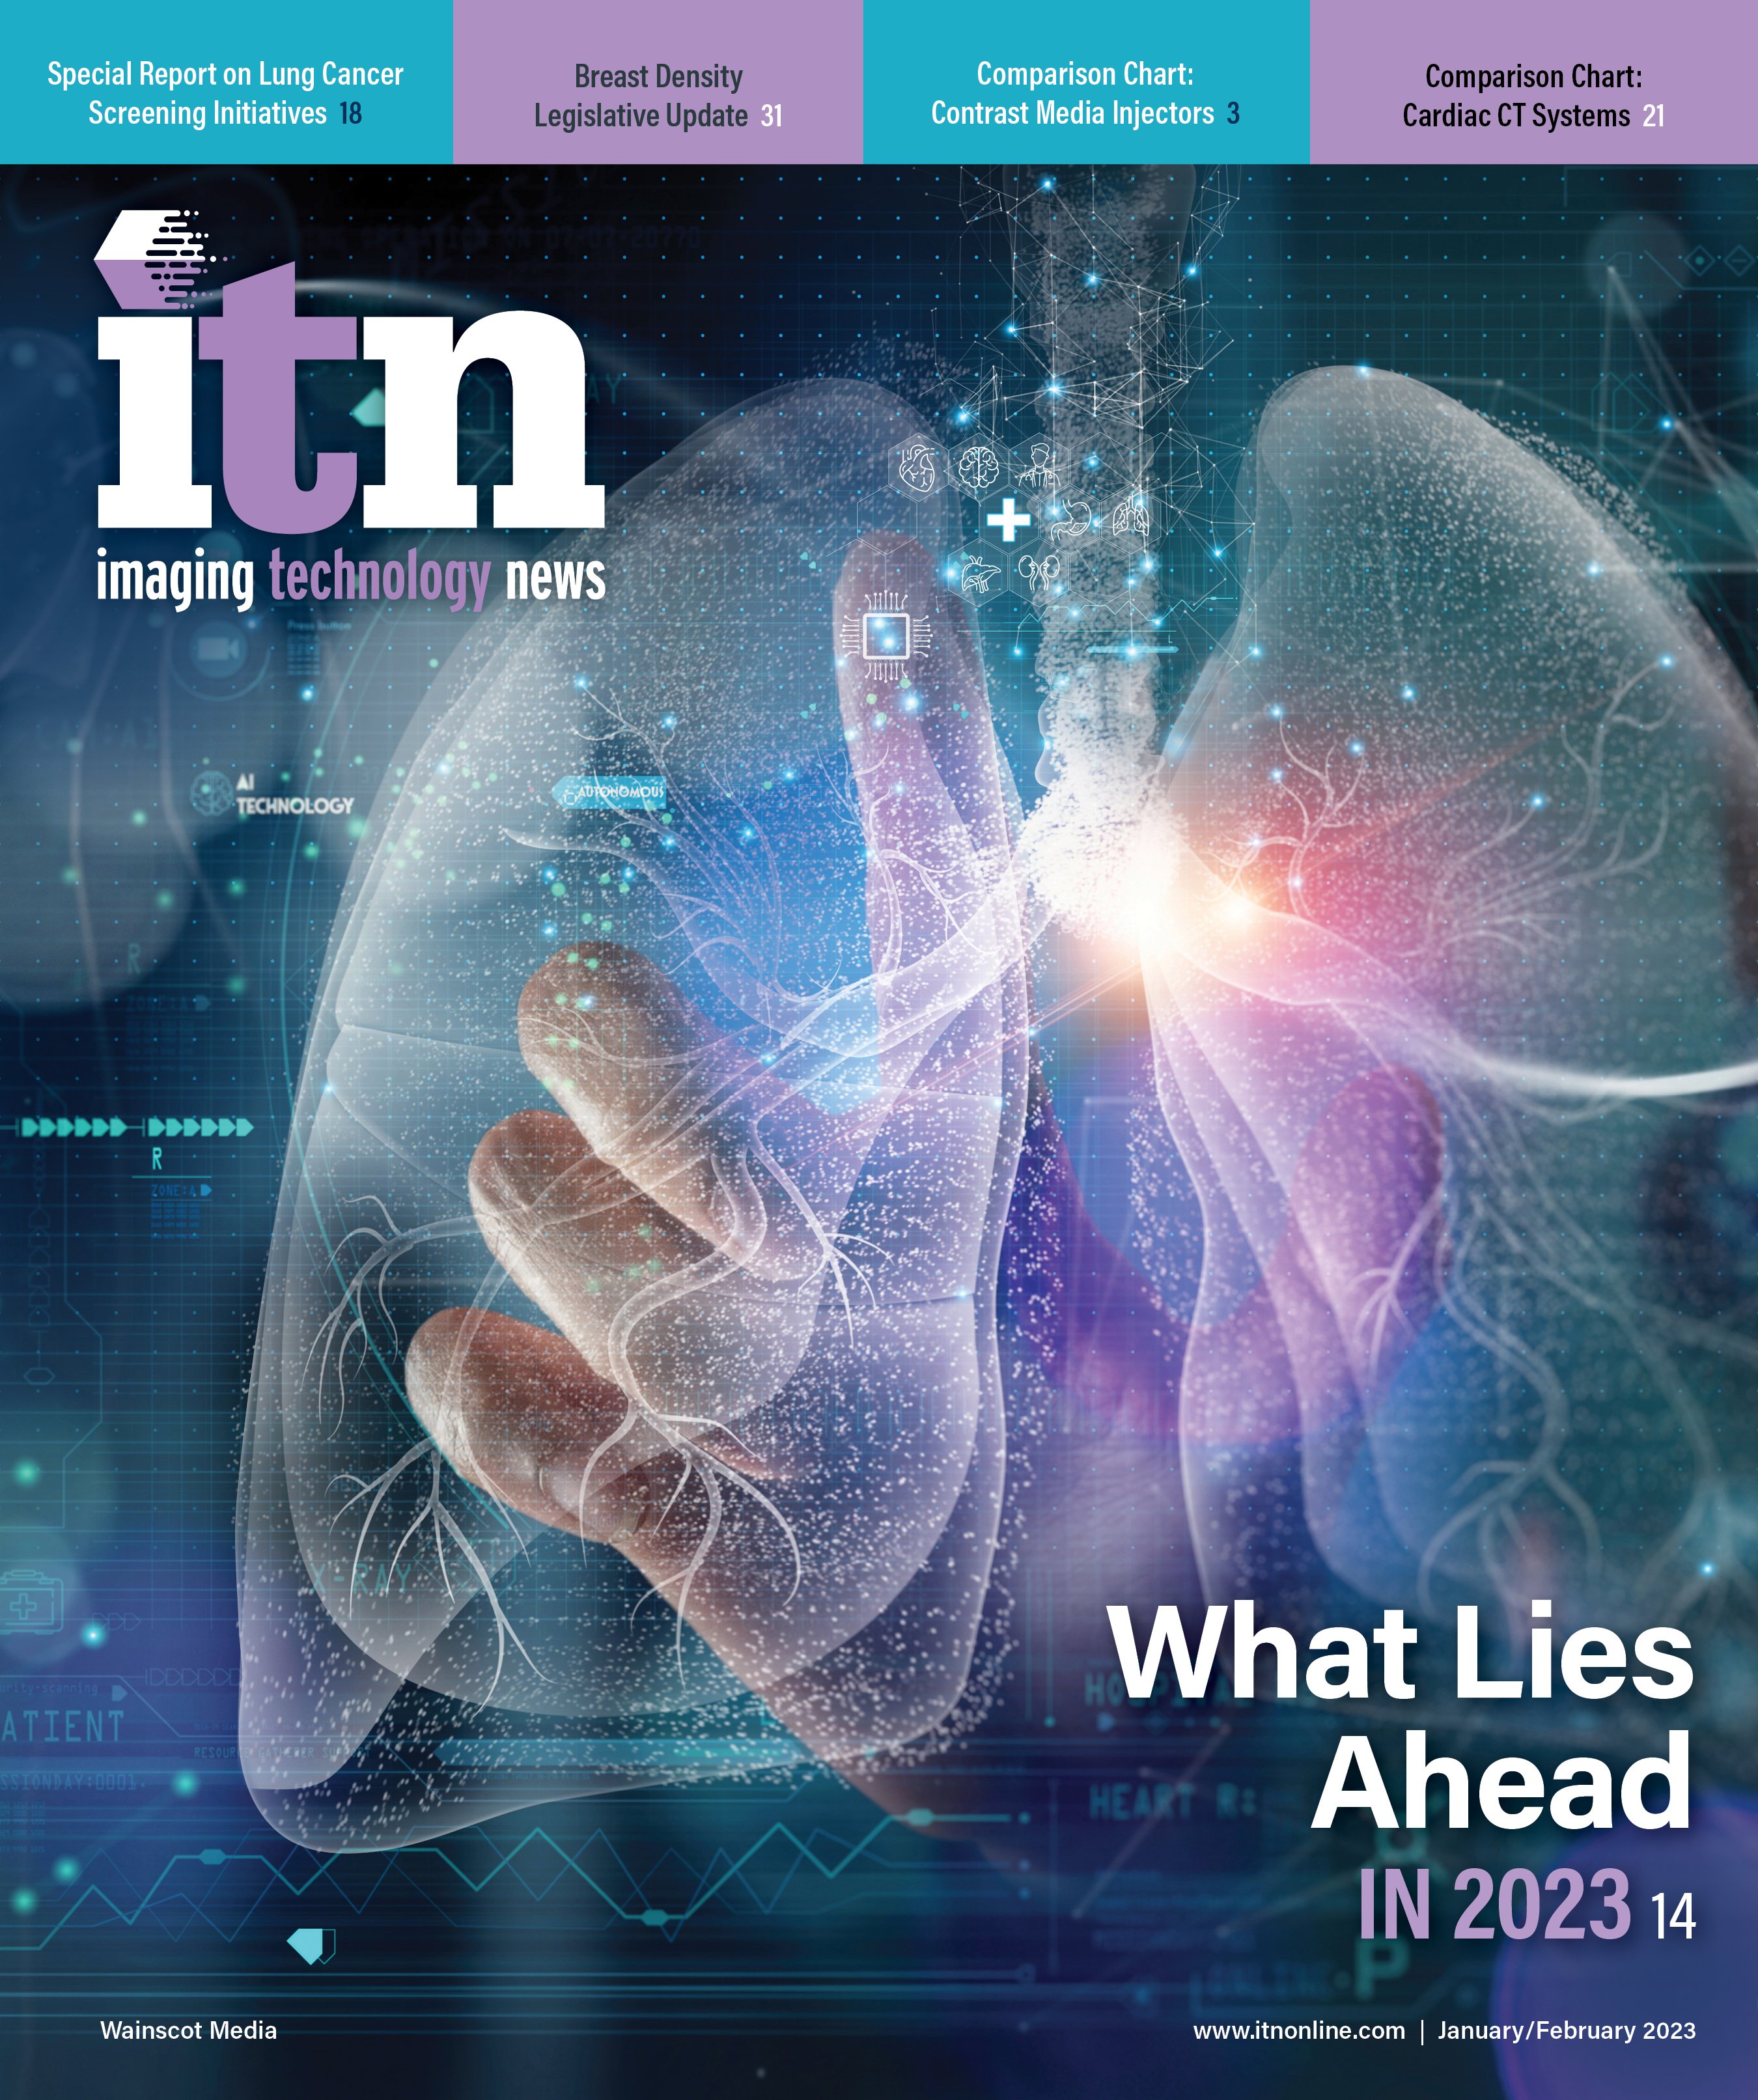 Have you read the January/February 2023 issue of Imaging Technology News?